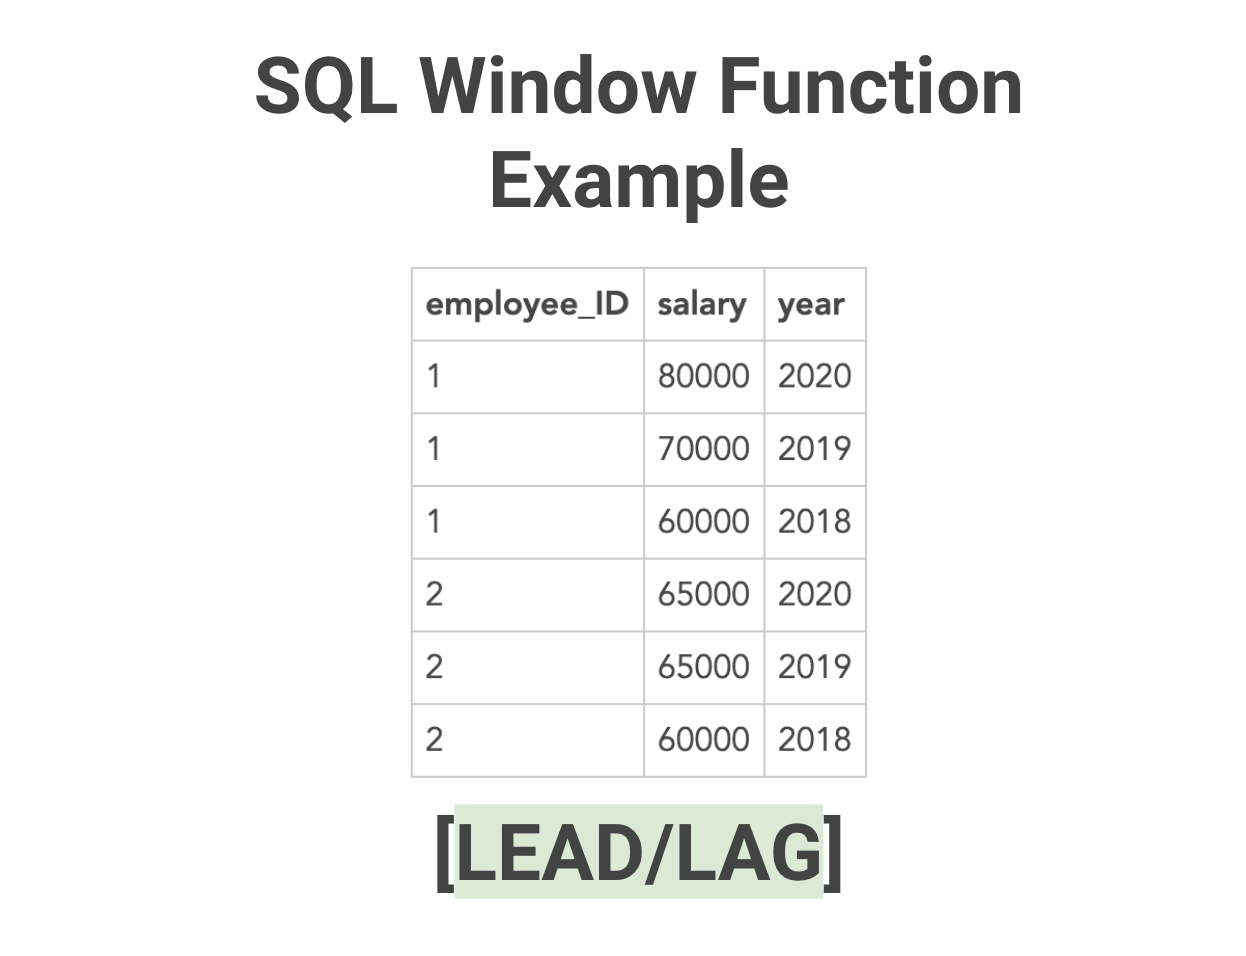 SQL Window Function Example Interview Question - LEAD/LAG